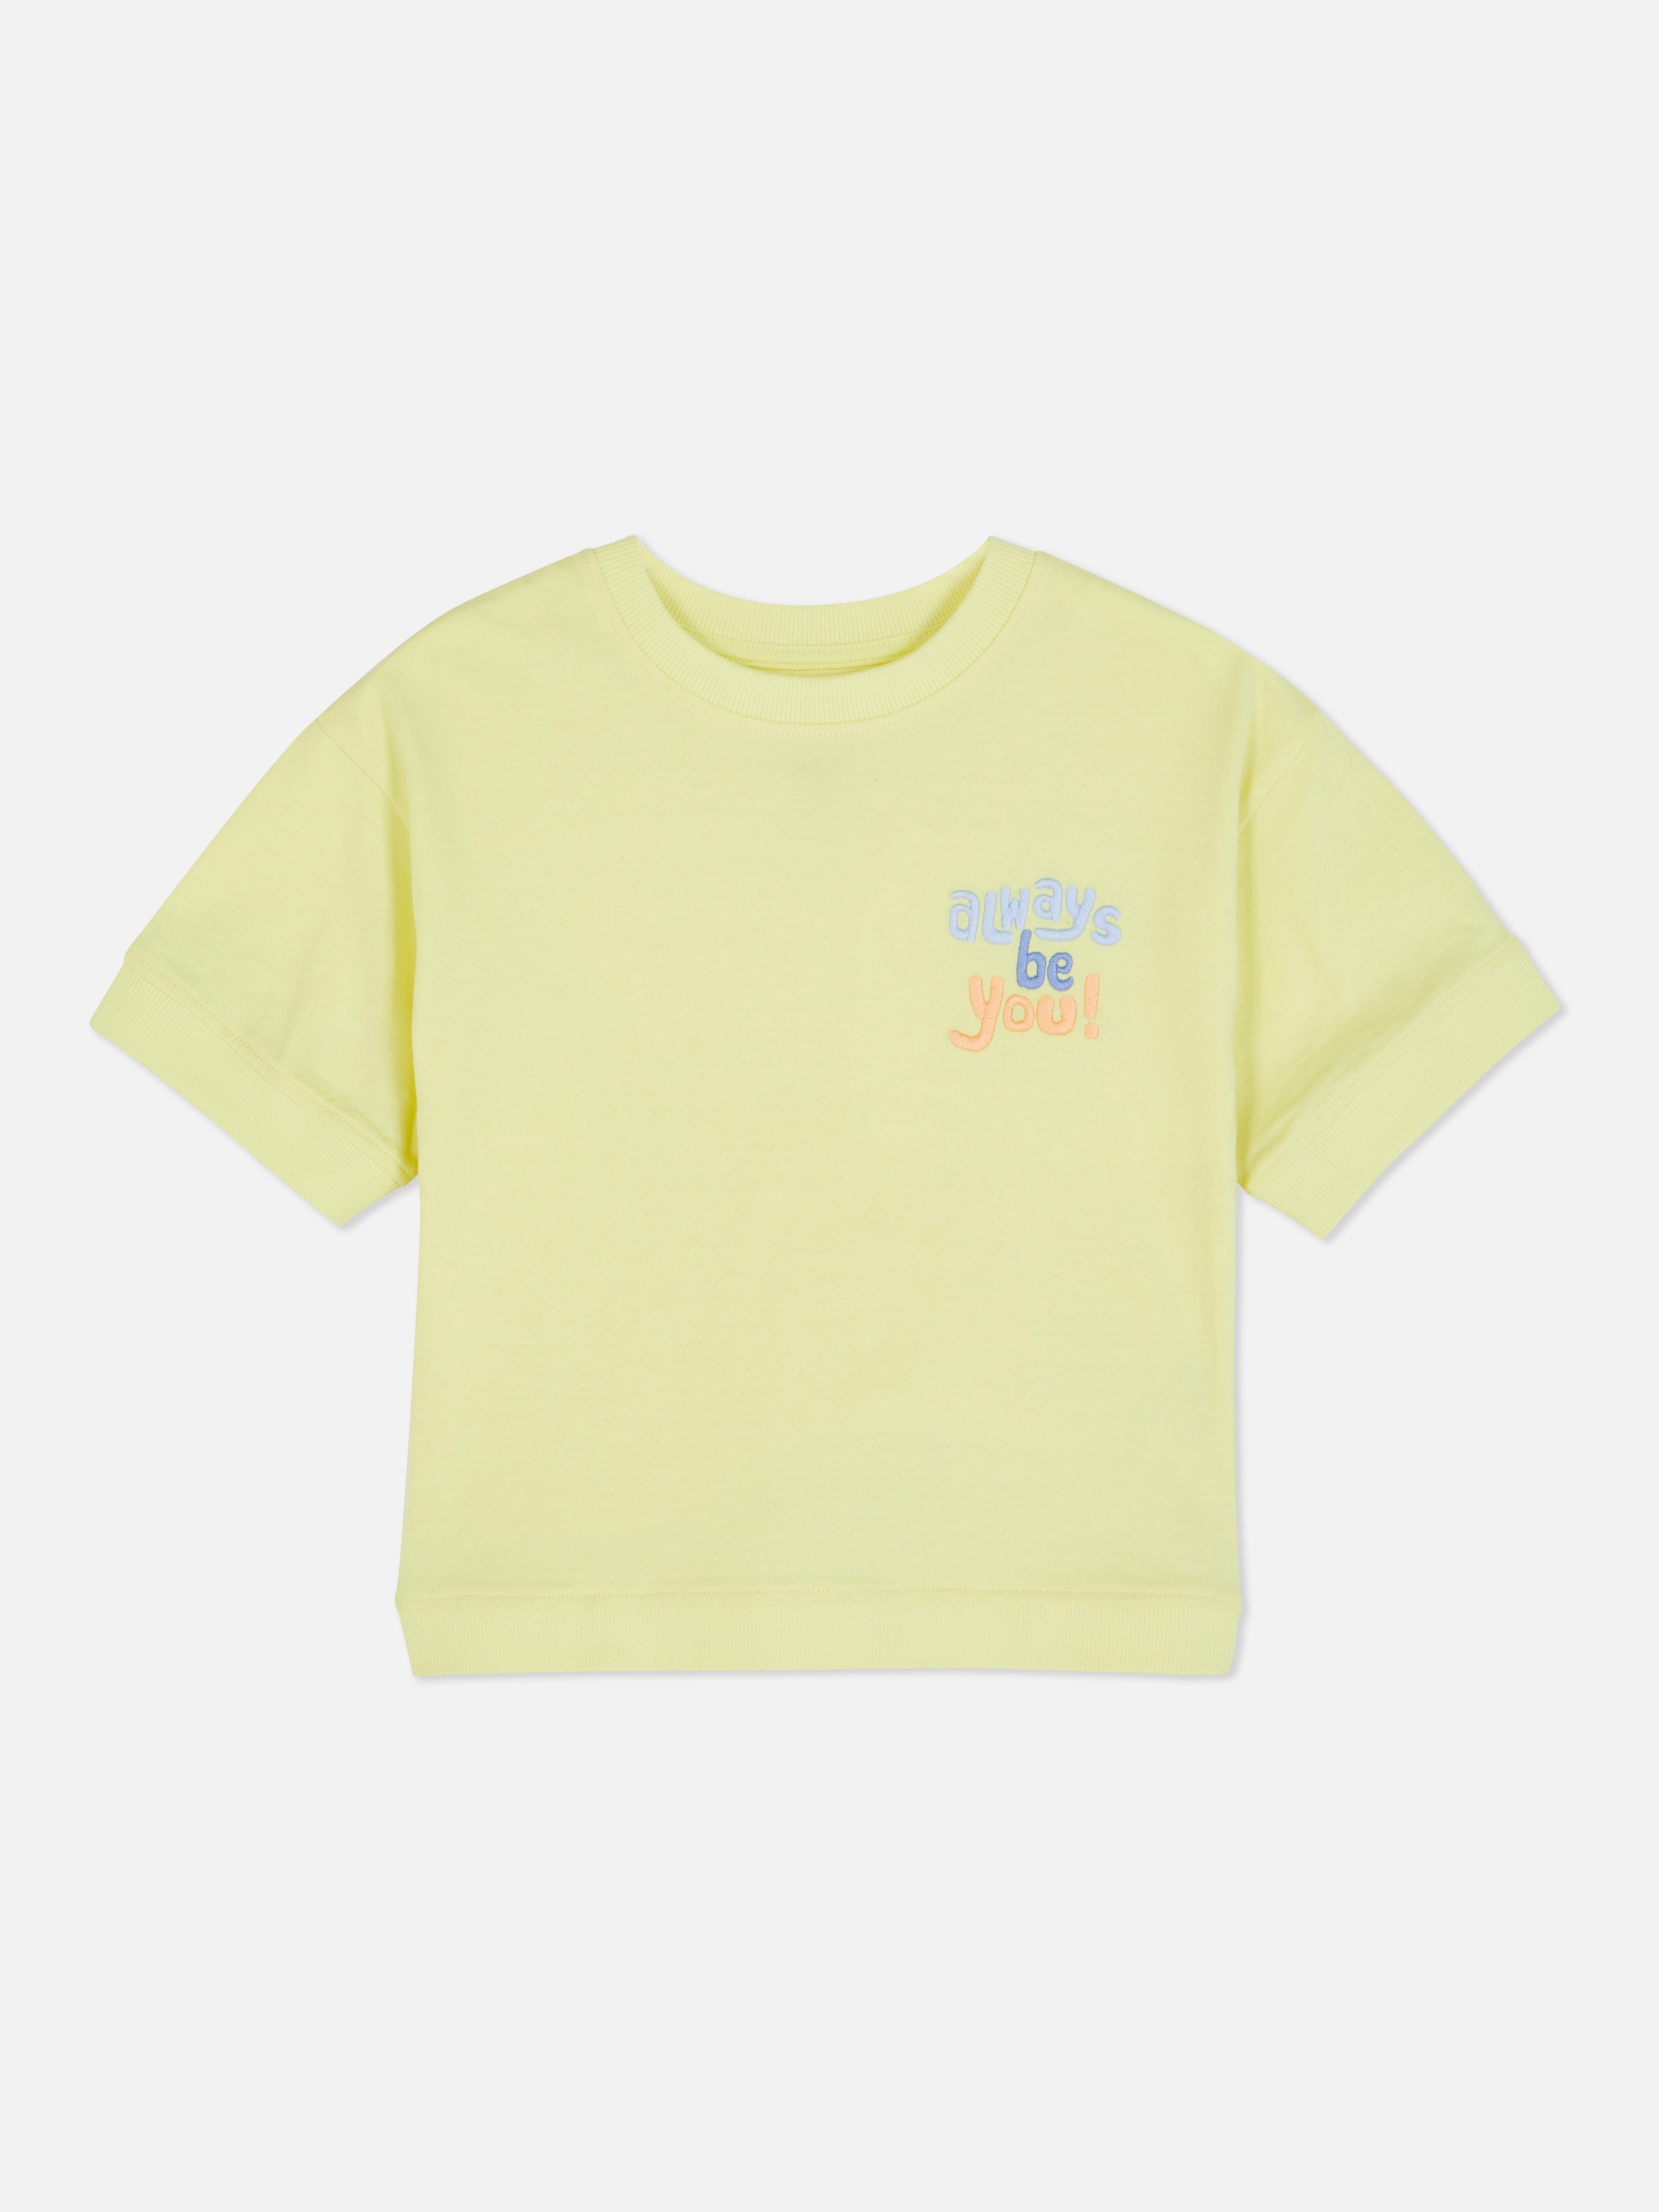 Embroidered Short Sleeve T-shirt Yellow